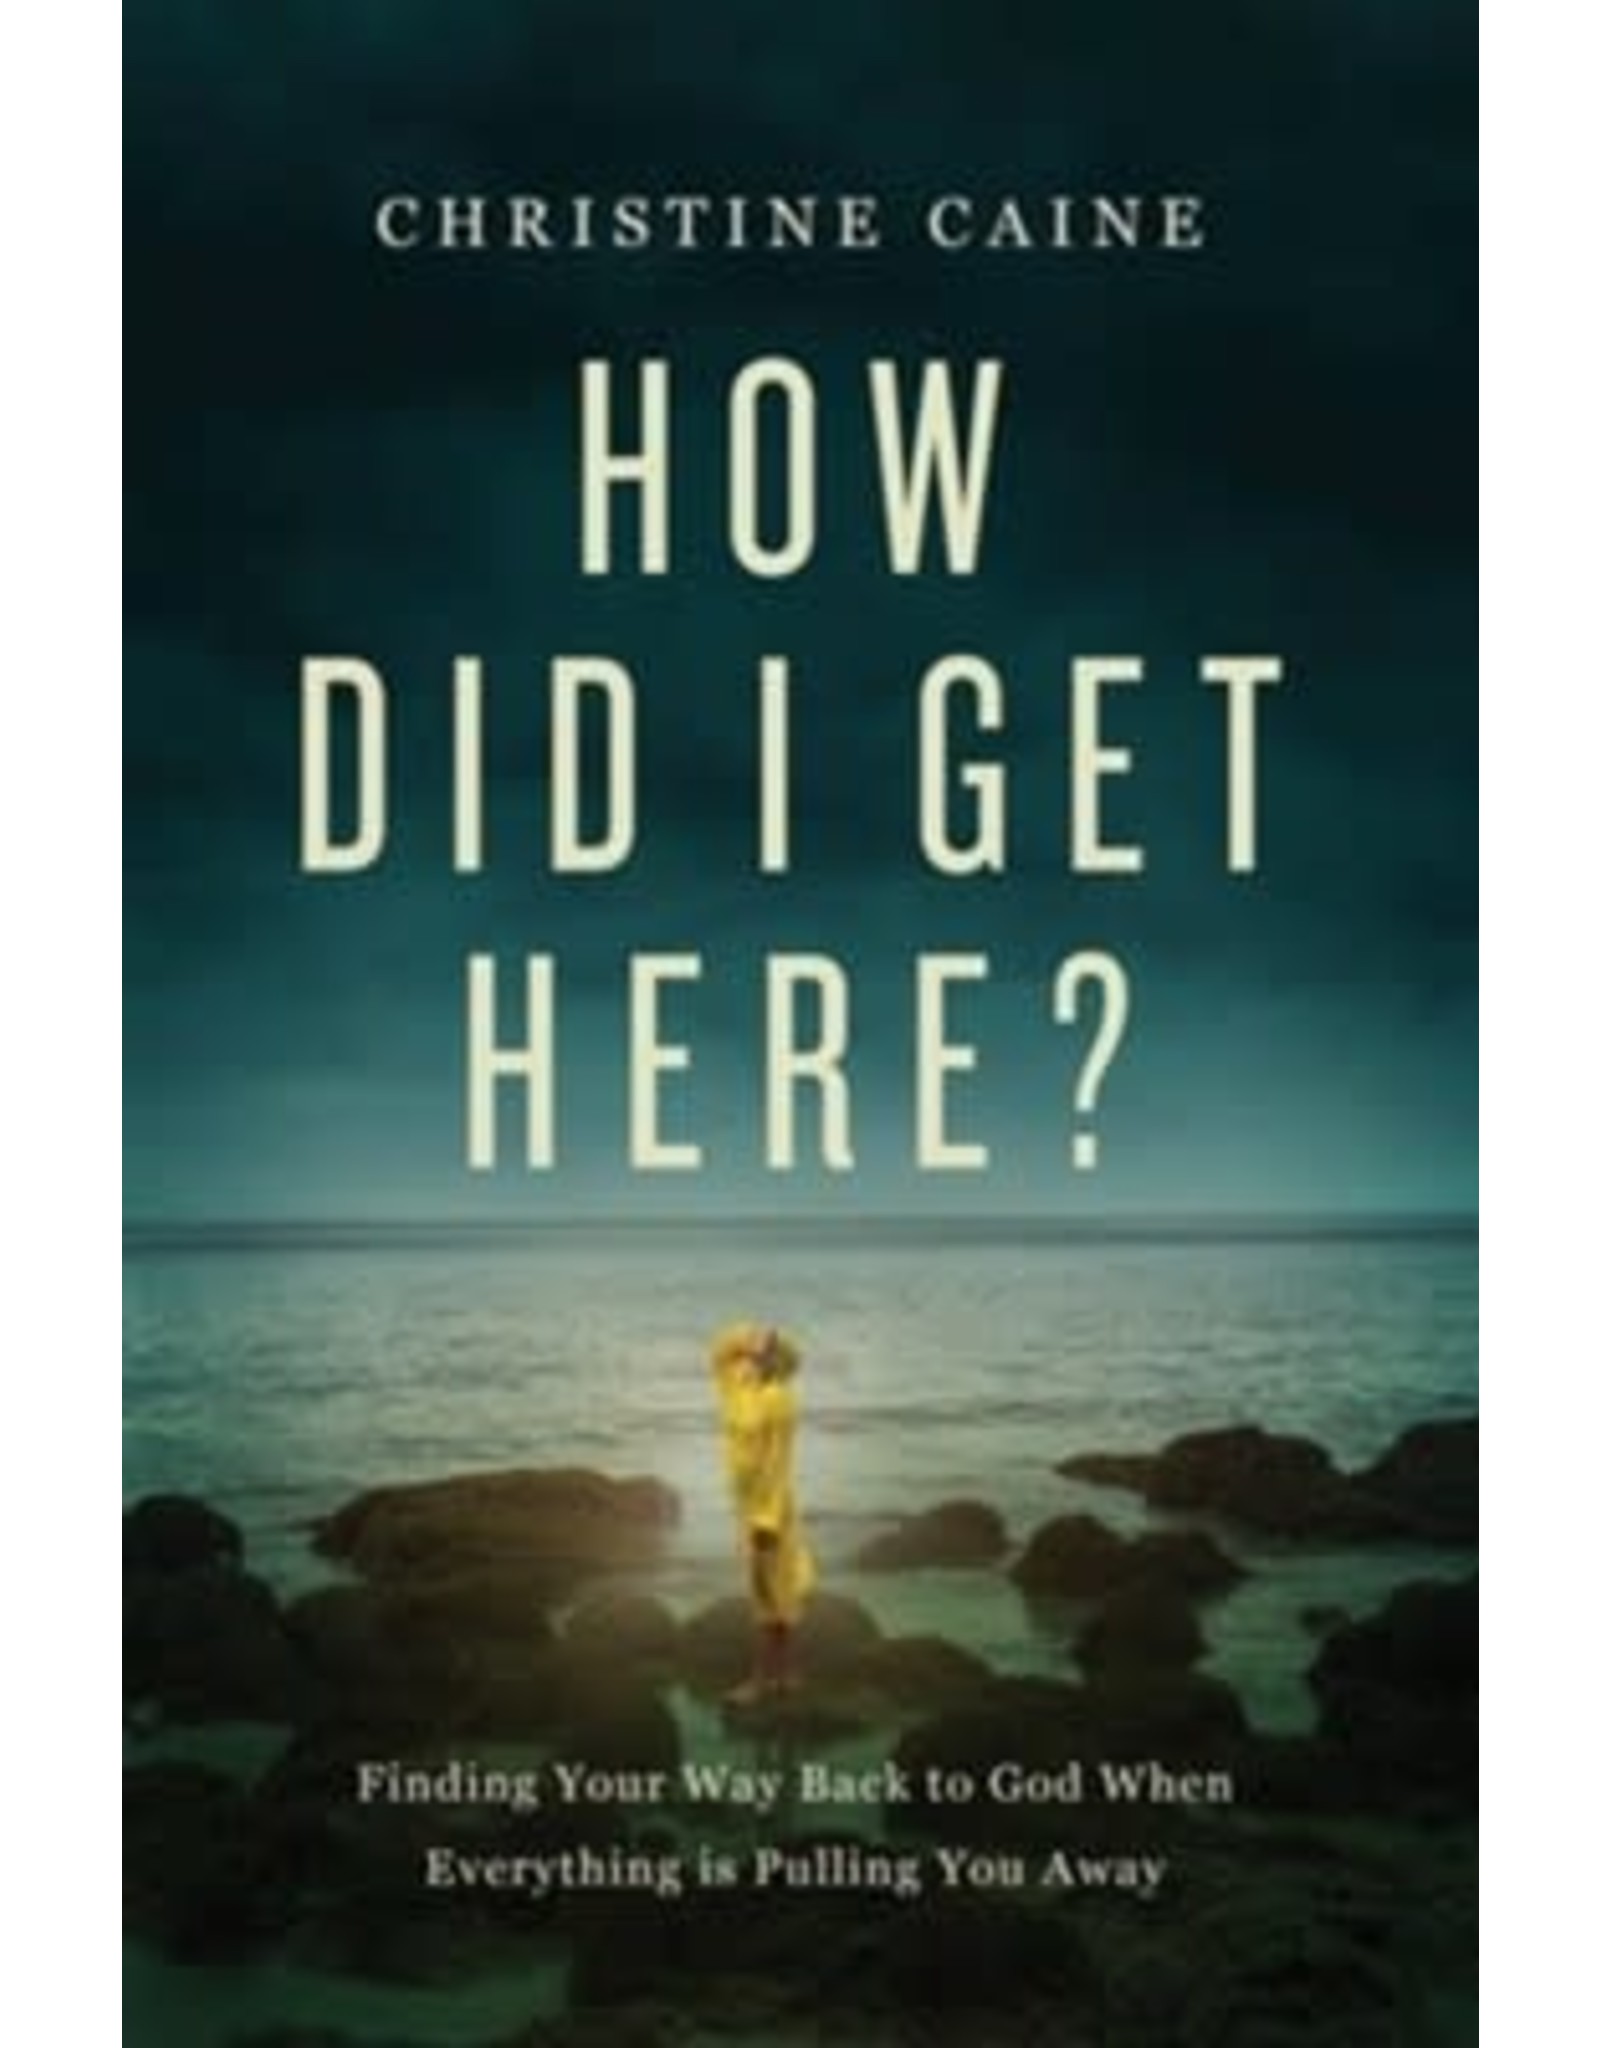 How Did I Get Here by Christine Caine